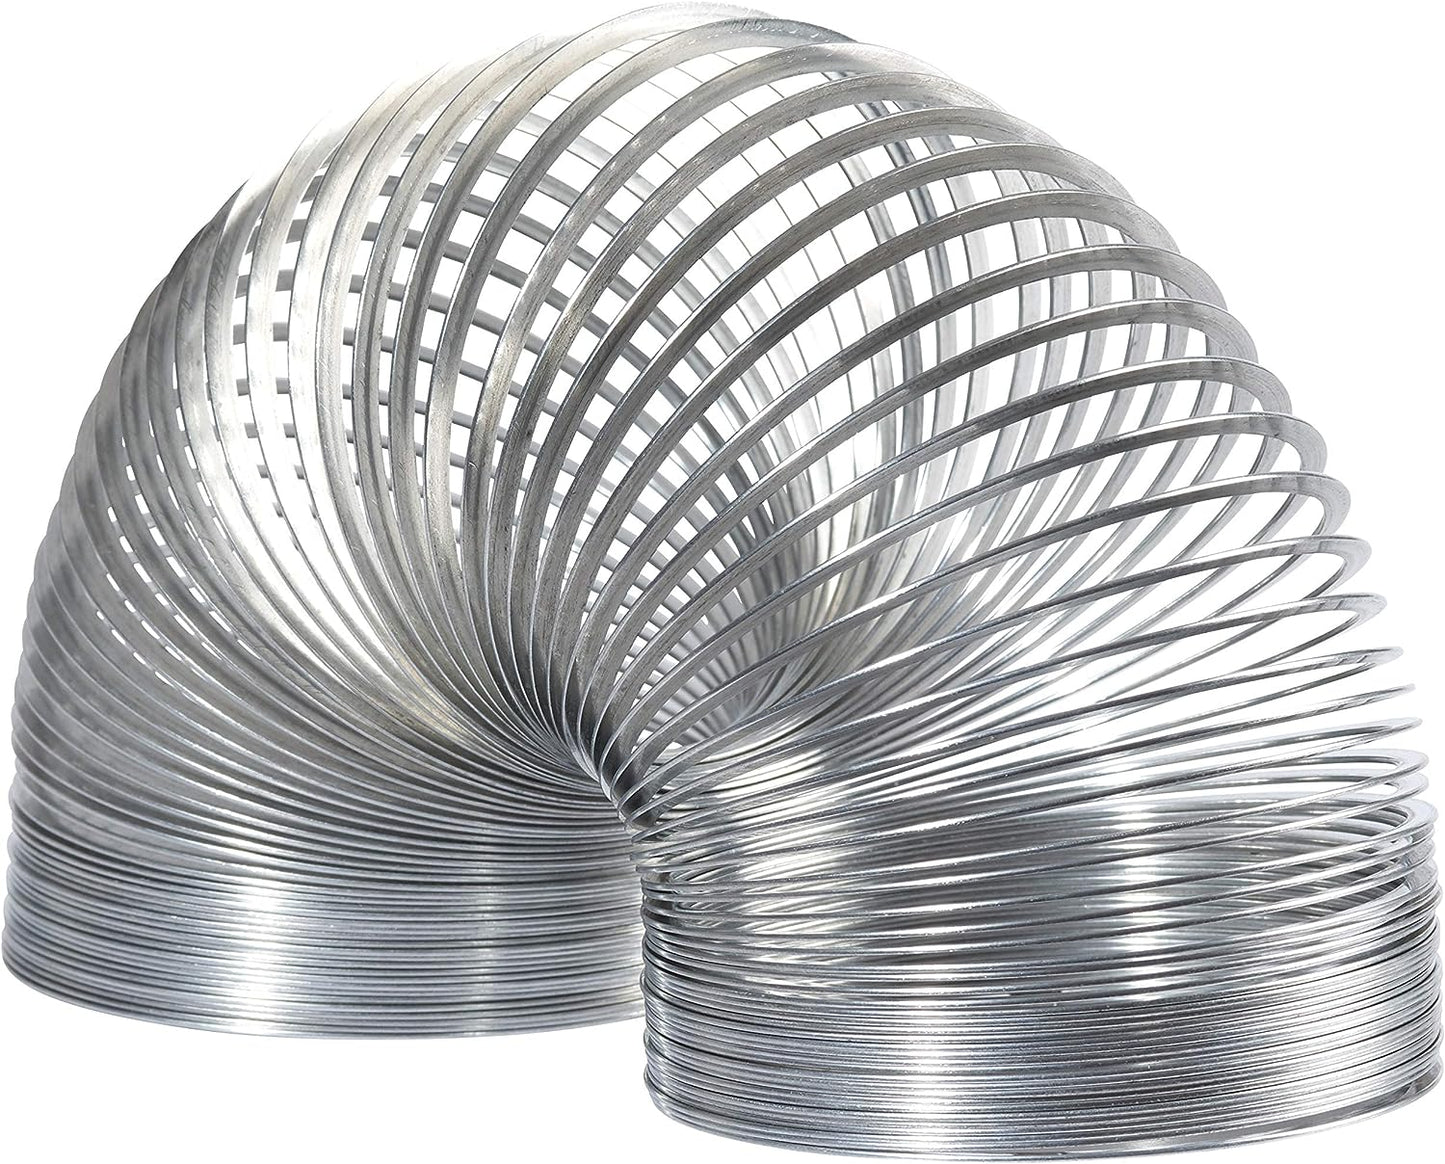 The Original Slinky Walking Spring Toy, 3-Pack Metal Slinky, Fidget Toys, Party Favors and Gifts, Kids Toys for Ages 5 Up, Amazon Exclusive